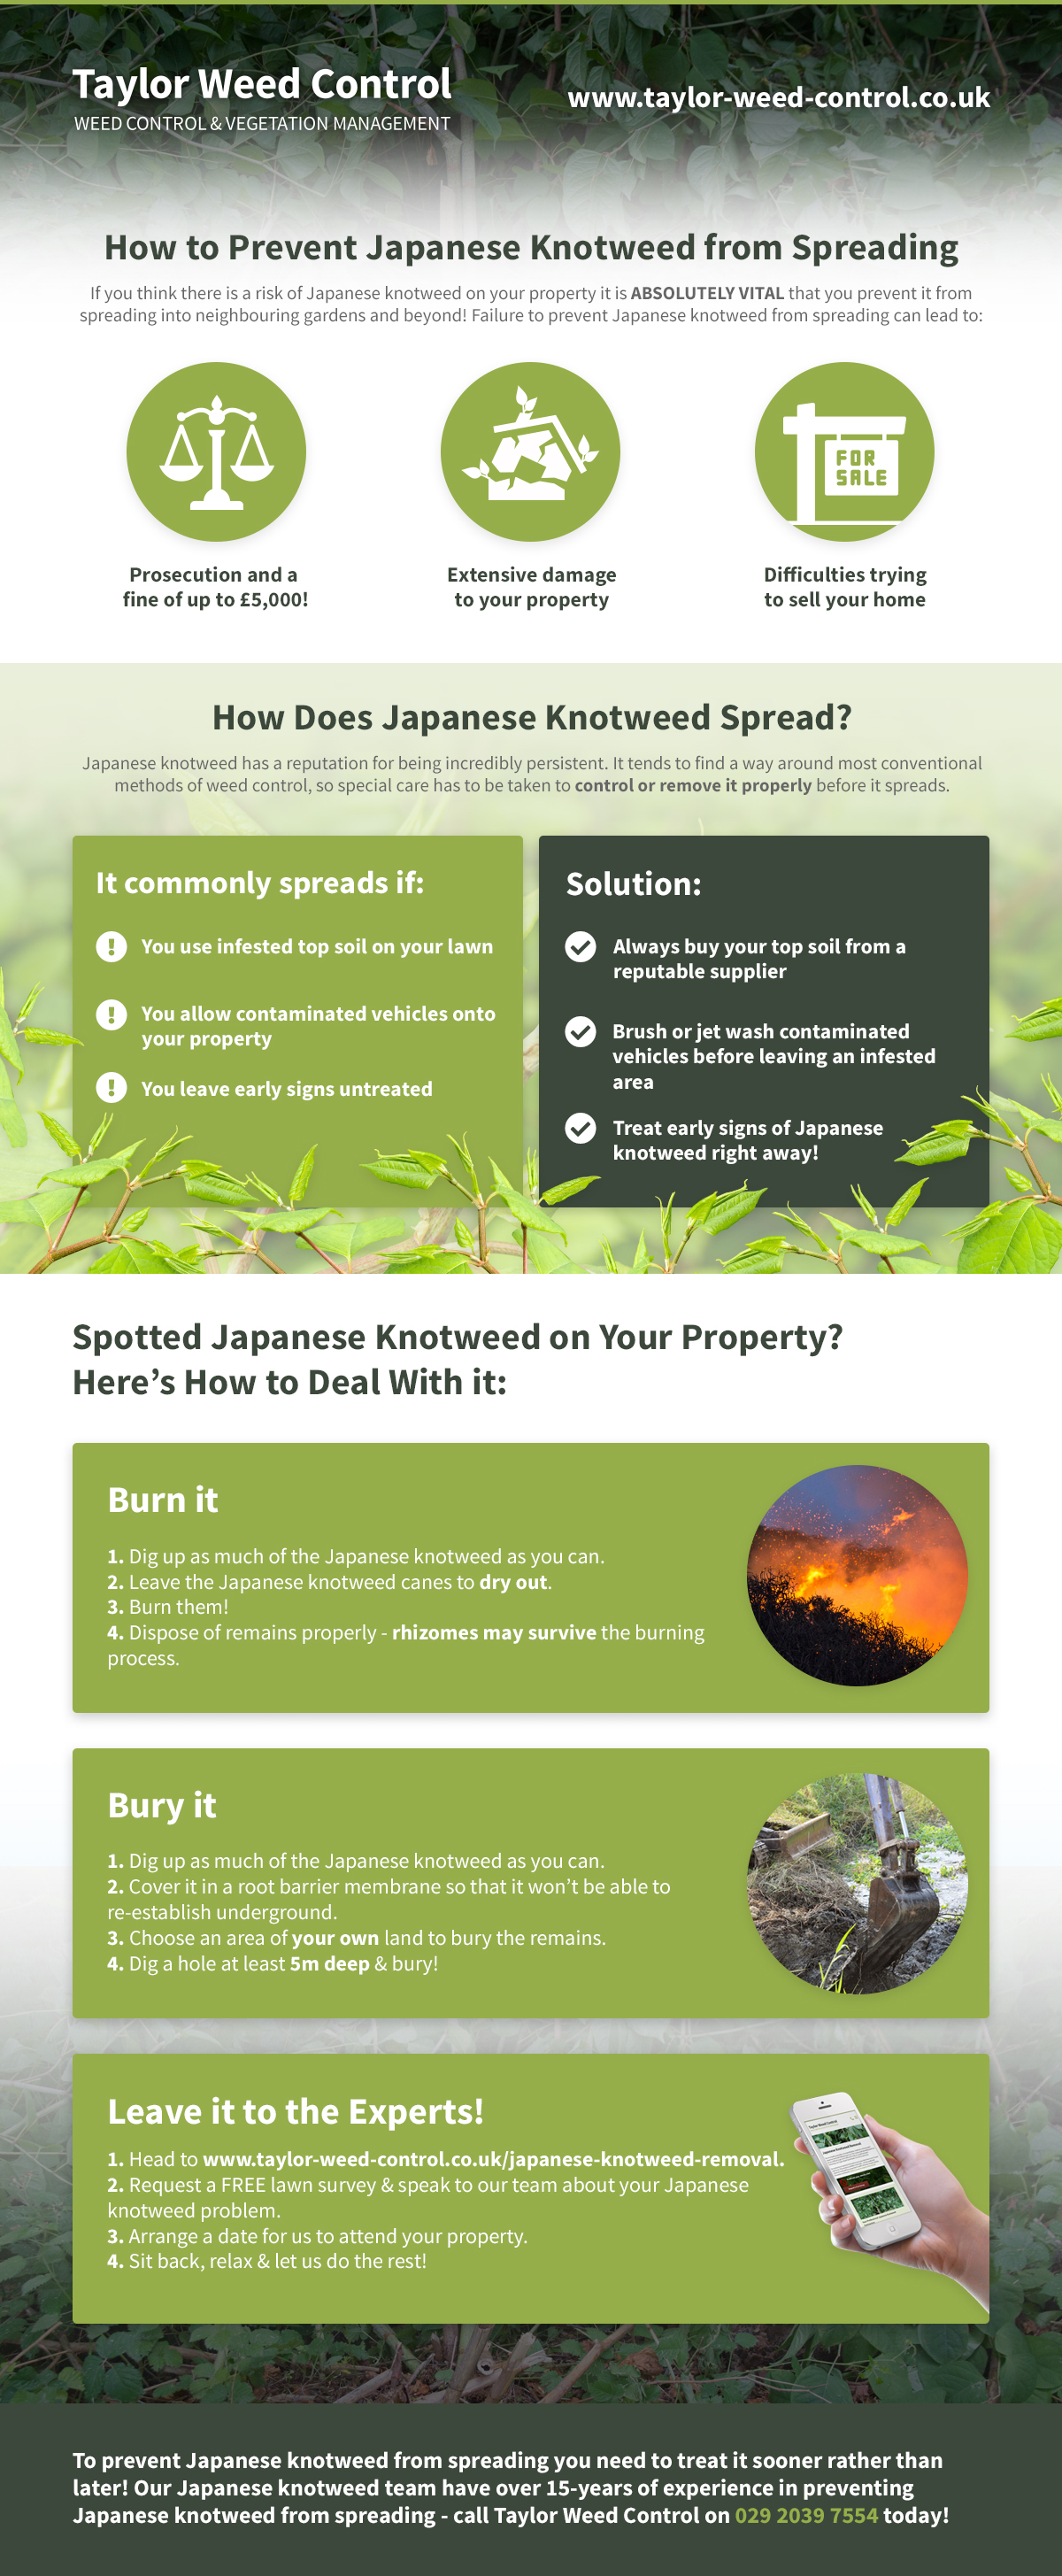 How to Prevent Japanese Knotweed from Spreading